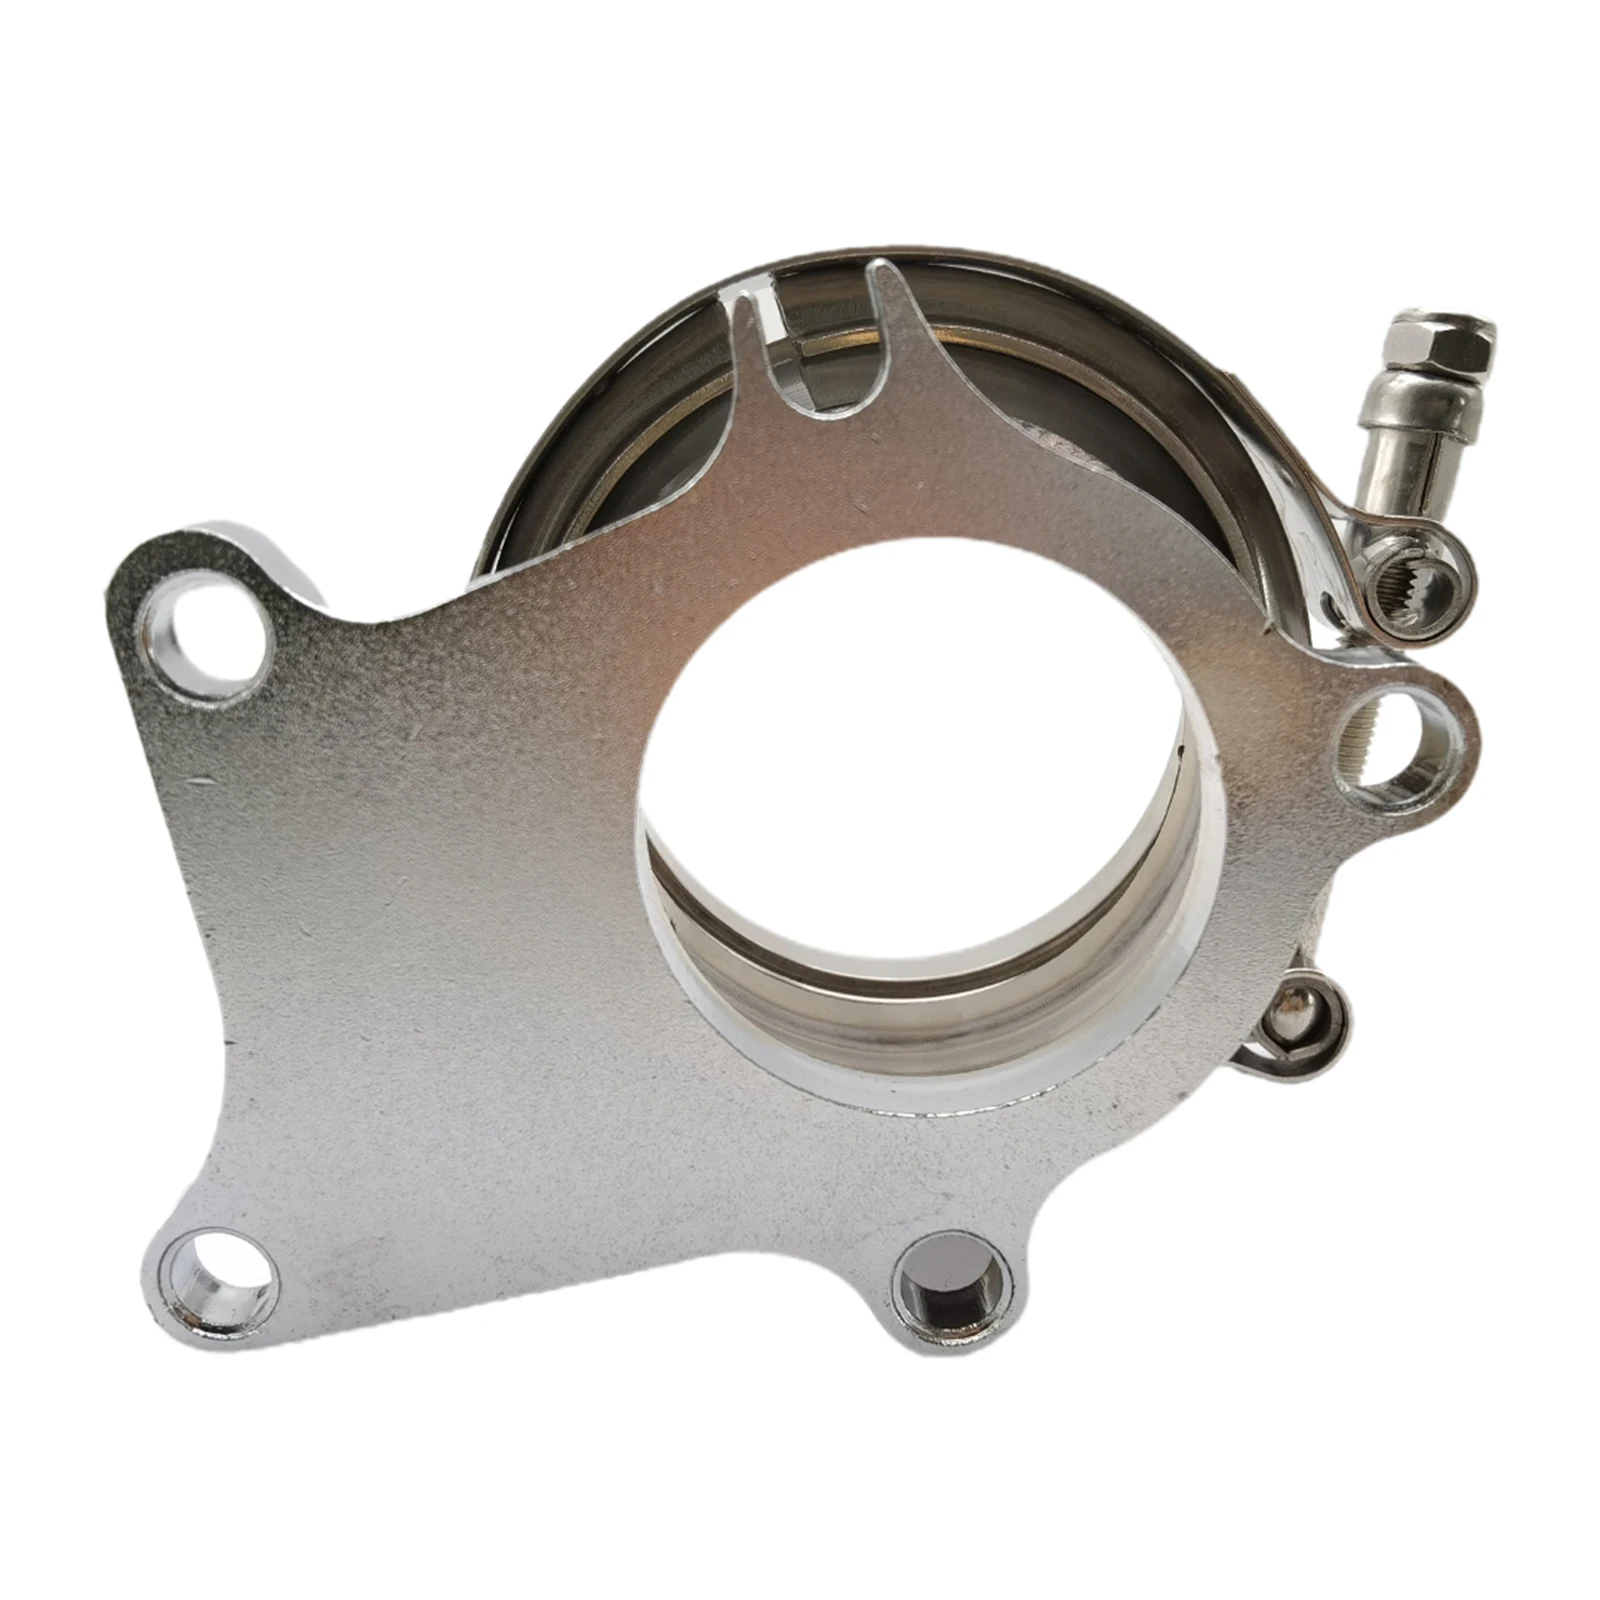 Flange Adapter,2.5in T3 T4 T04E 3 Bolt Holes to 2.5in V-Band Turbo Downpipe Adapter Flange 